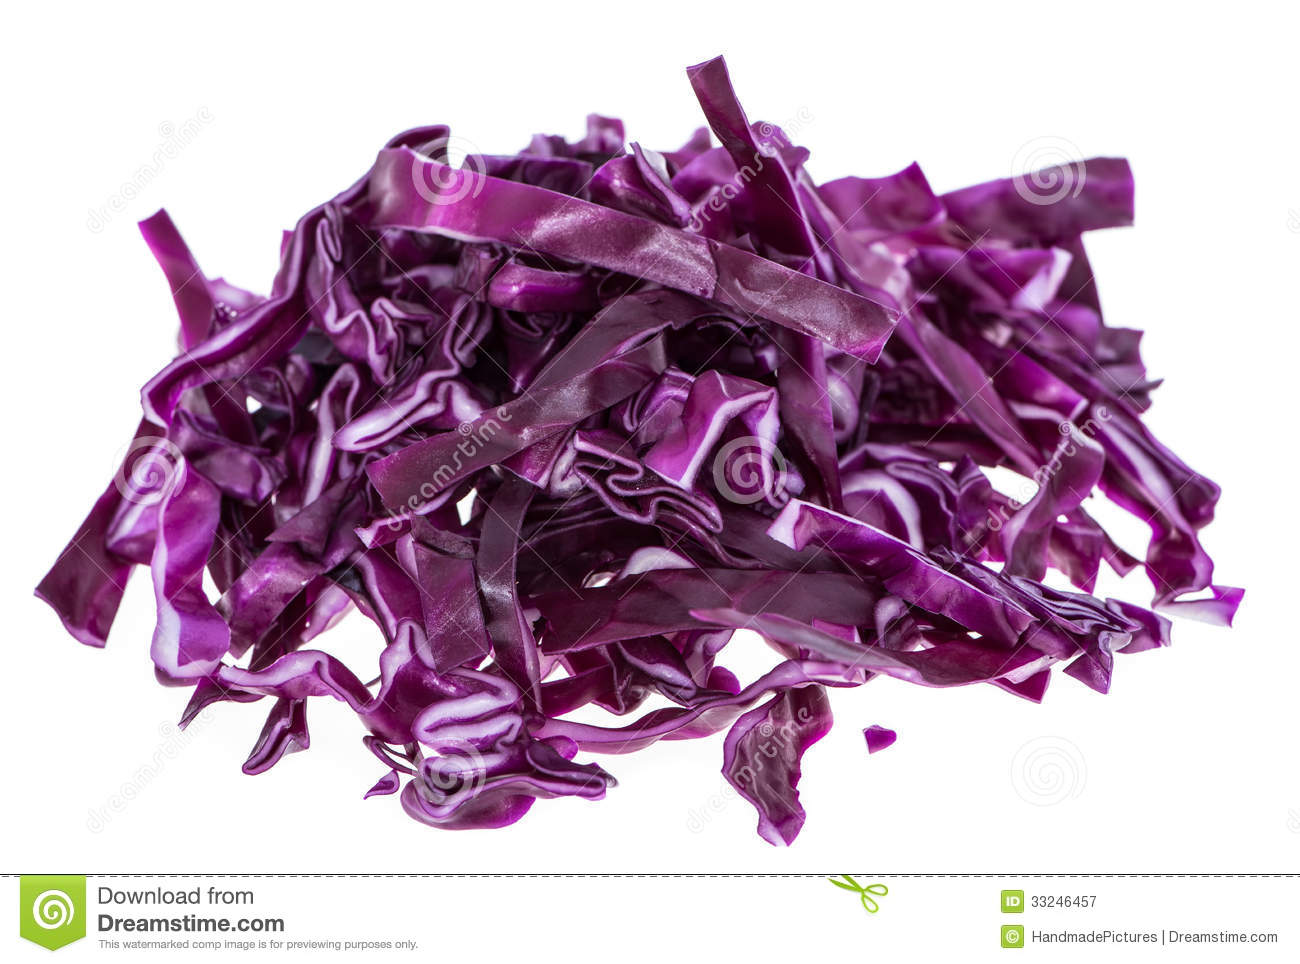 Isolated Red Coleslaw Royalty Free Stock Photography   Image  33246457